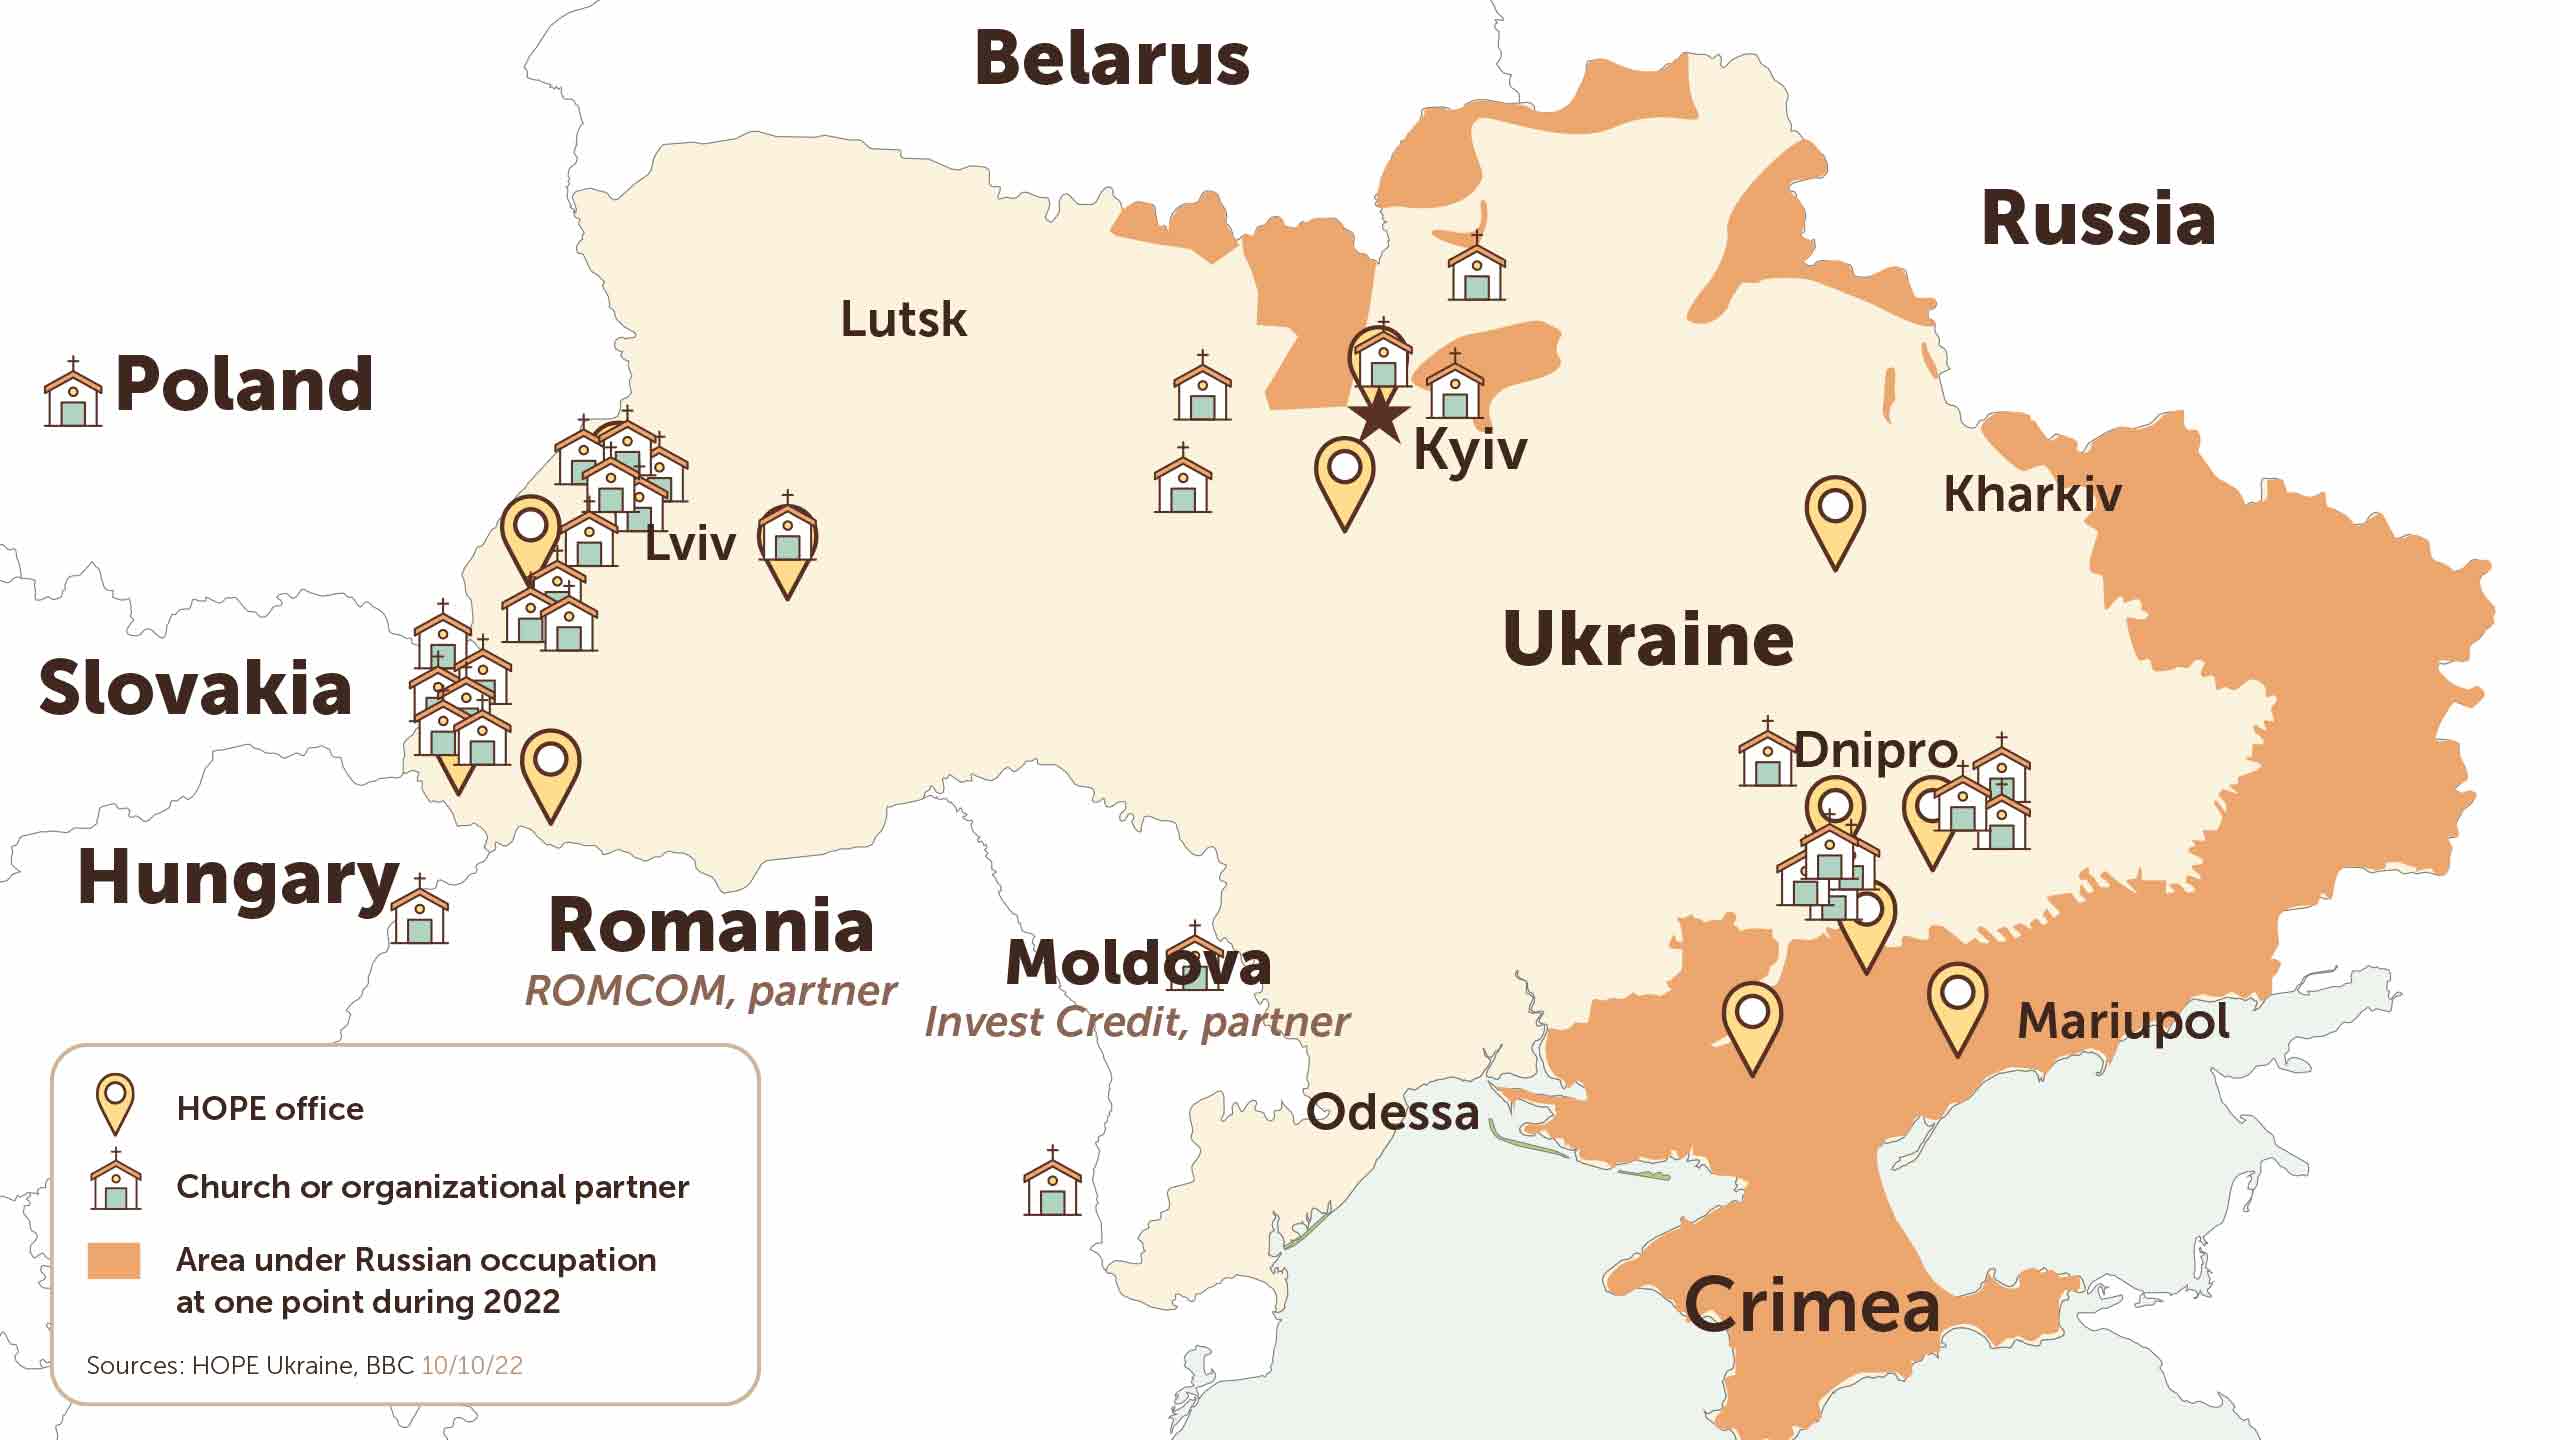 Map of Ukraine with HOPE offices and churches marked